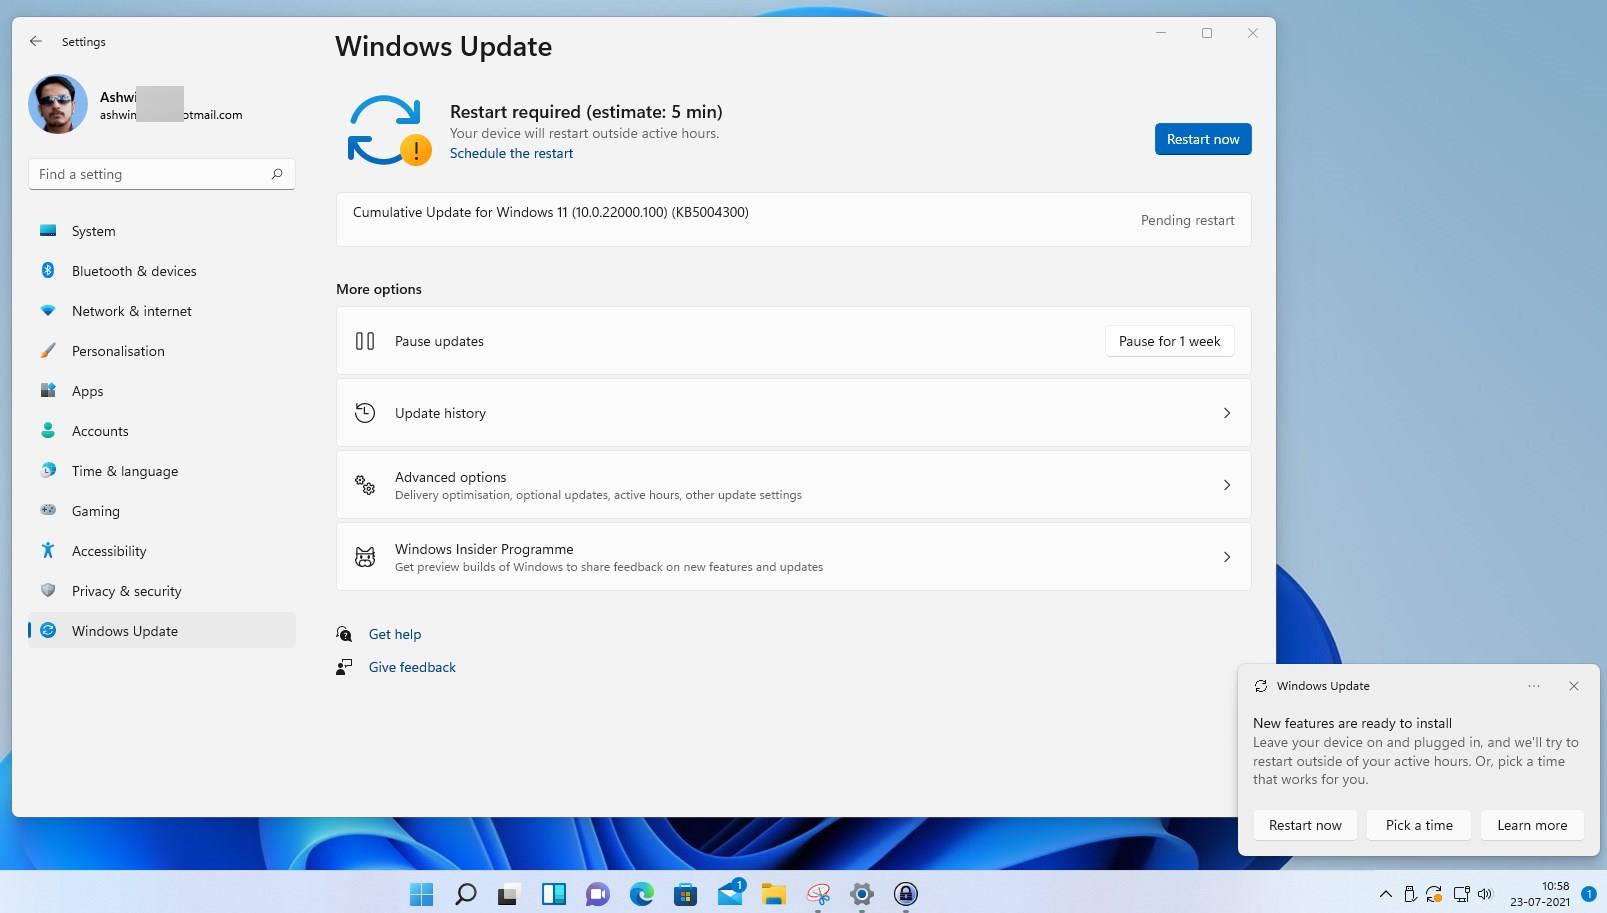 Windows 11 Insider Preview Build 22000.100 rolls out with some new animations and fixes Windows-11-Insider-Preview-Build-22000.100-KB5004300.jpg